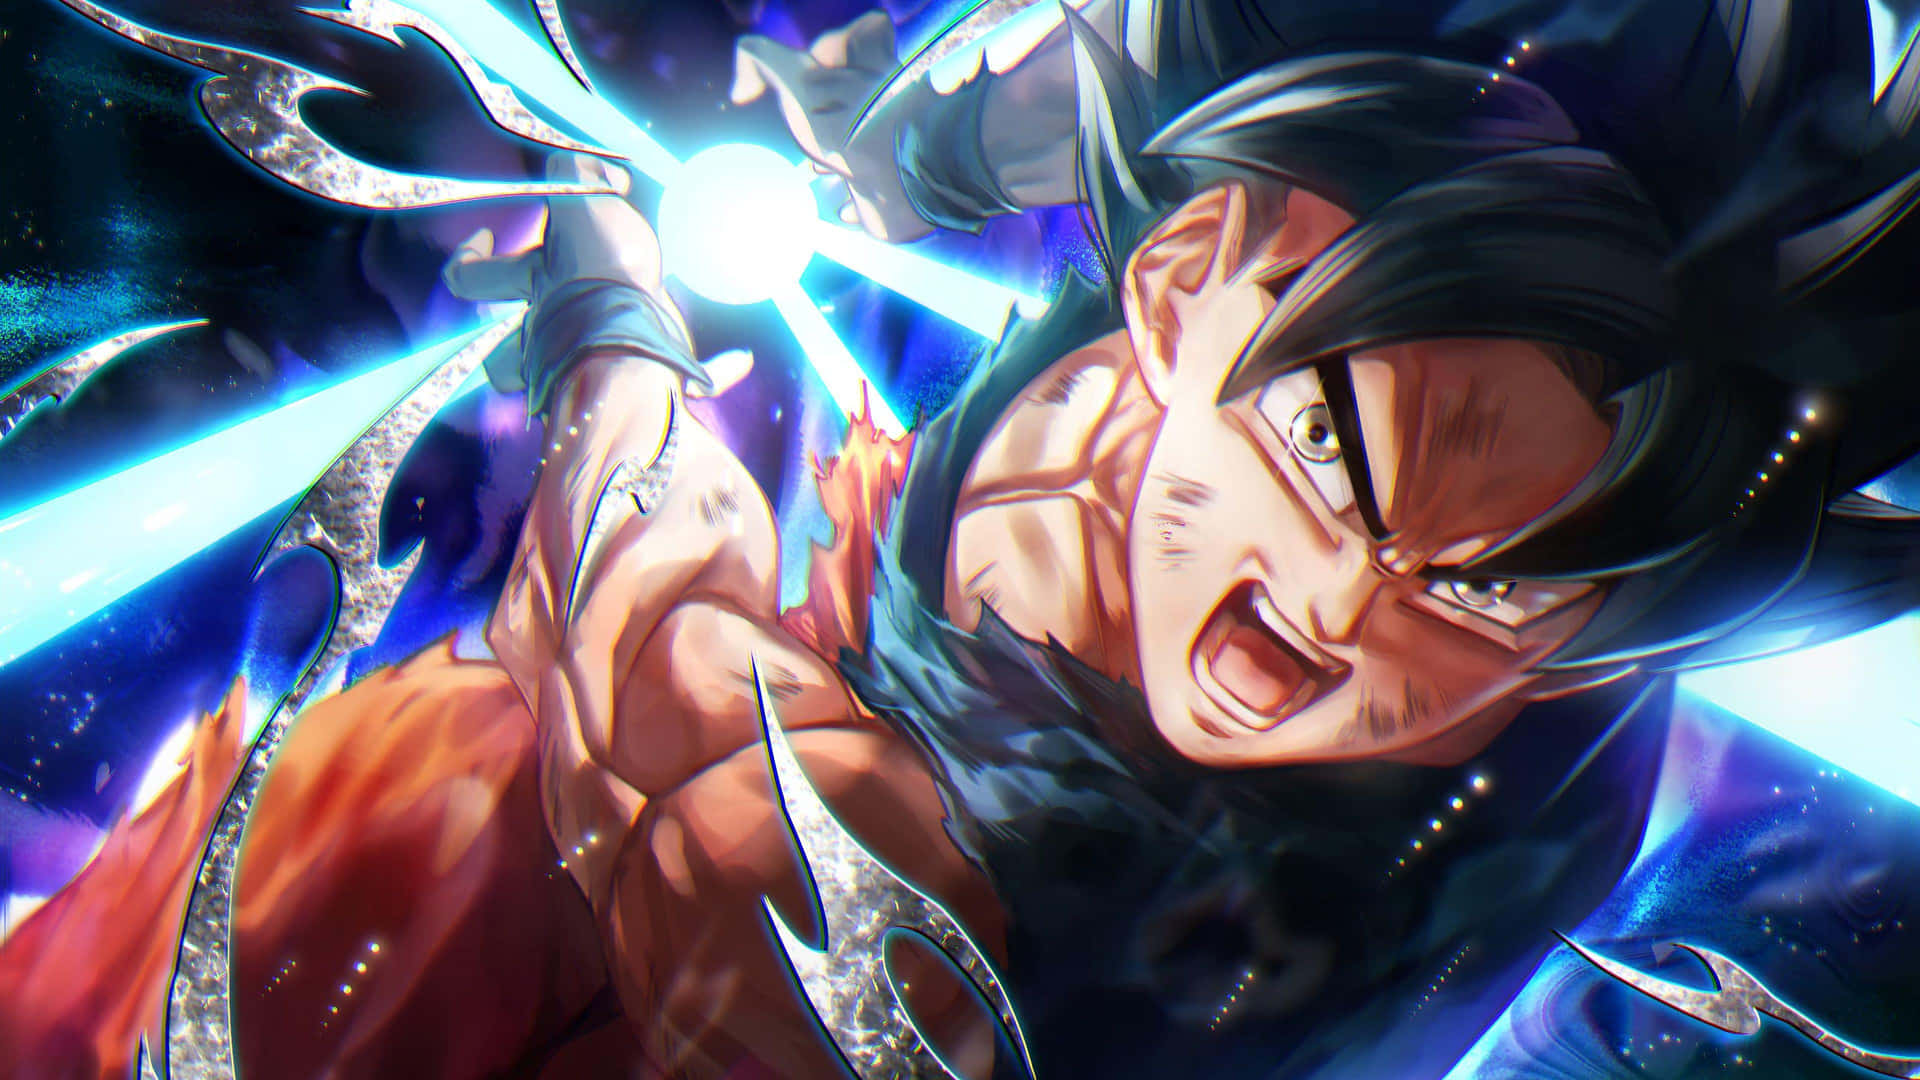 "Goku Unleashes His Power With Ultra Instinct" Wallpaper